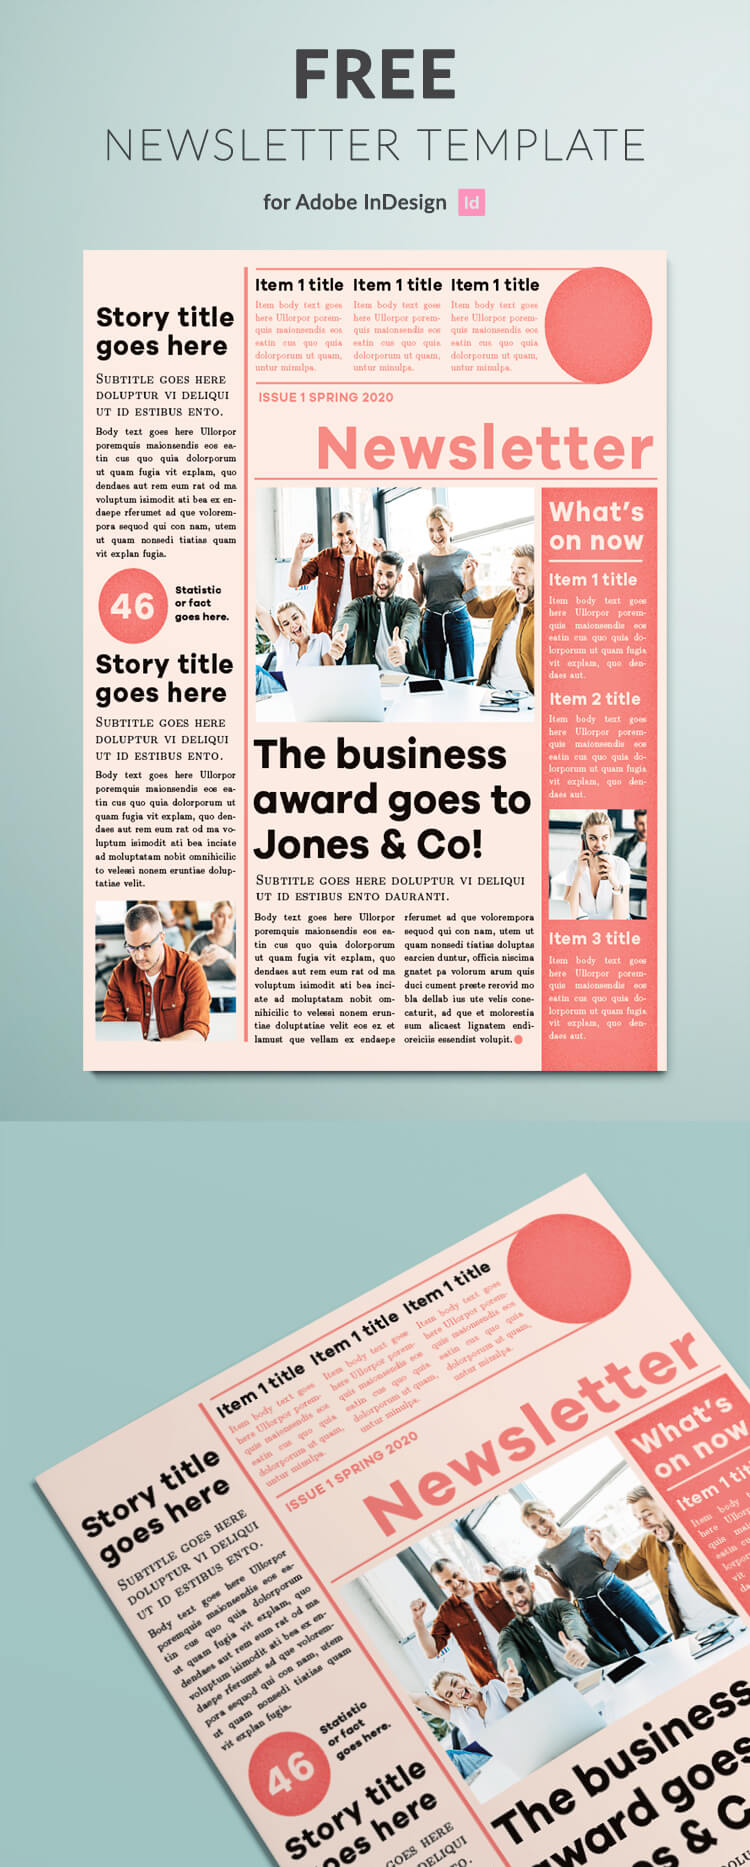 Free newsletter template for InDesign. Classic design for a business newsletter.